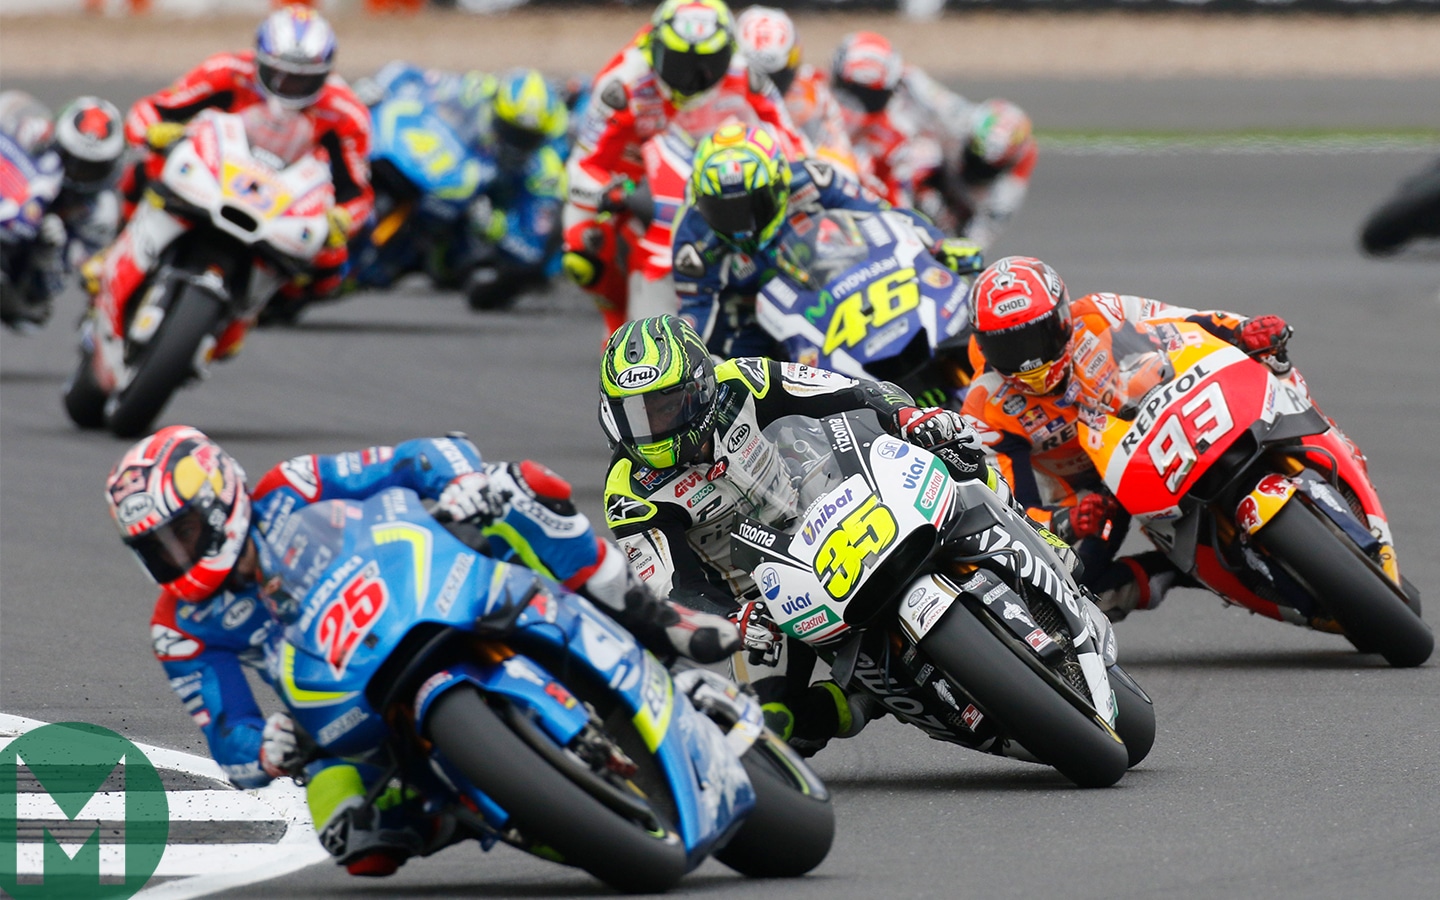 How Formula 1 can learn from MotoGP